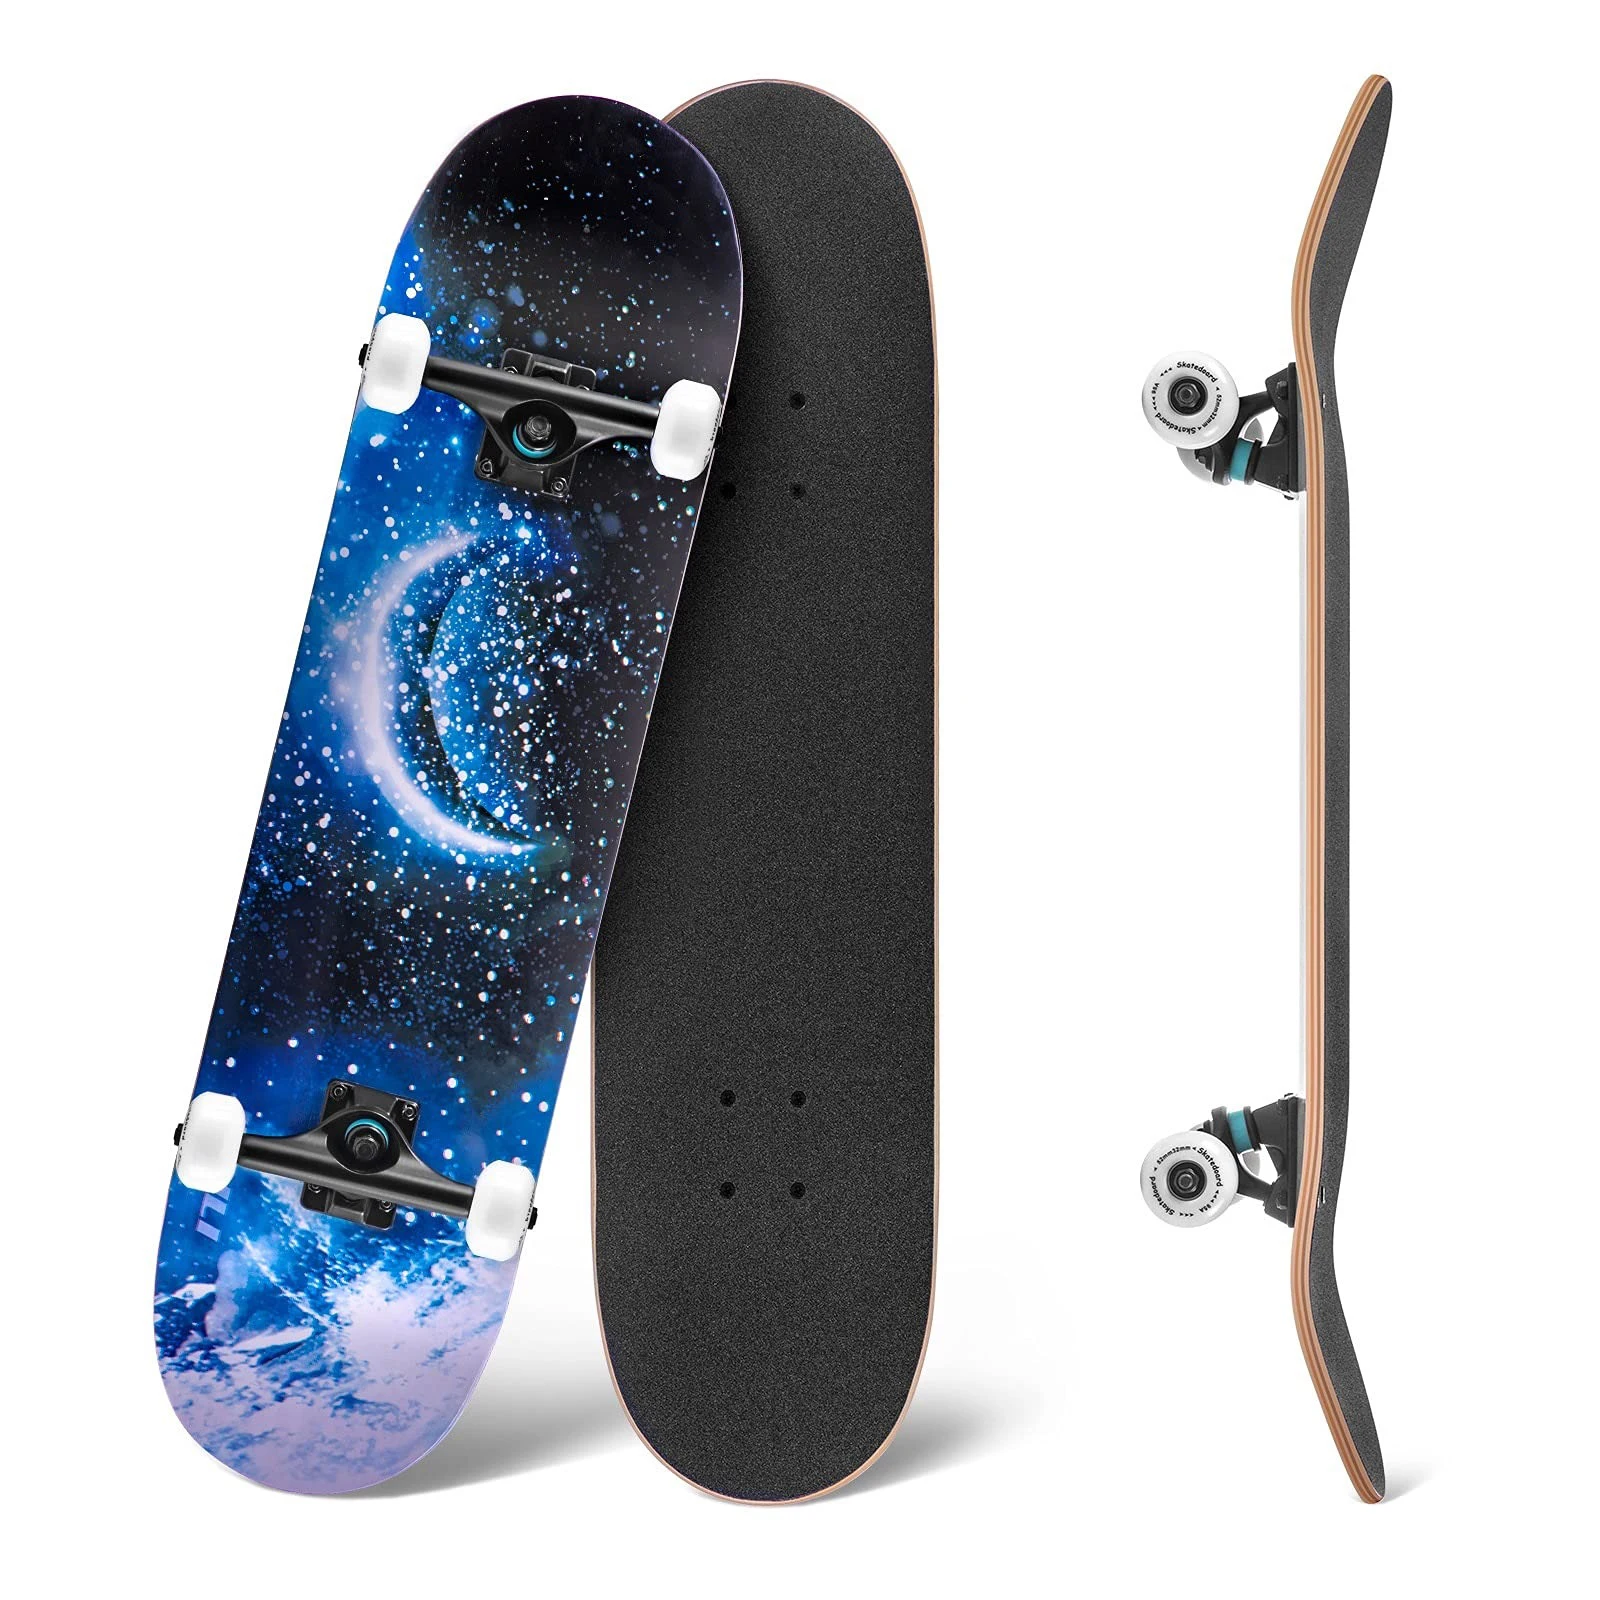 

Standard Skateboards 32 Inch Complete Skateboard for Kids and Adults 7 Layer Canadian Maple Double Kick Concave Skate Board